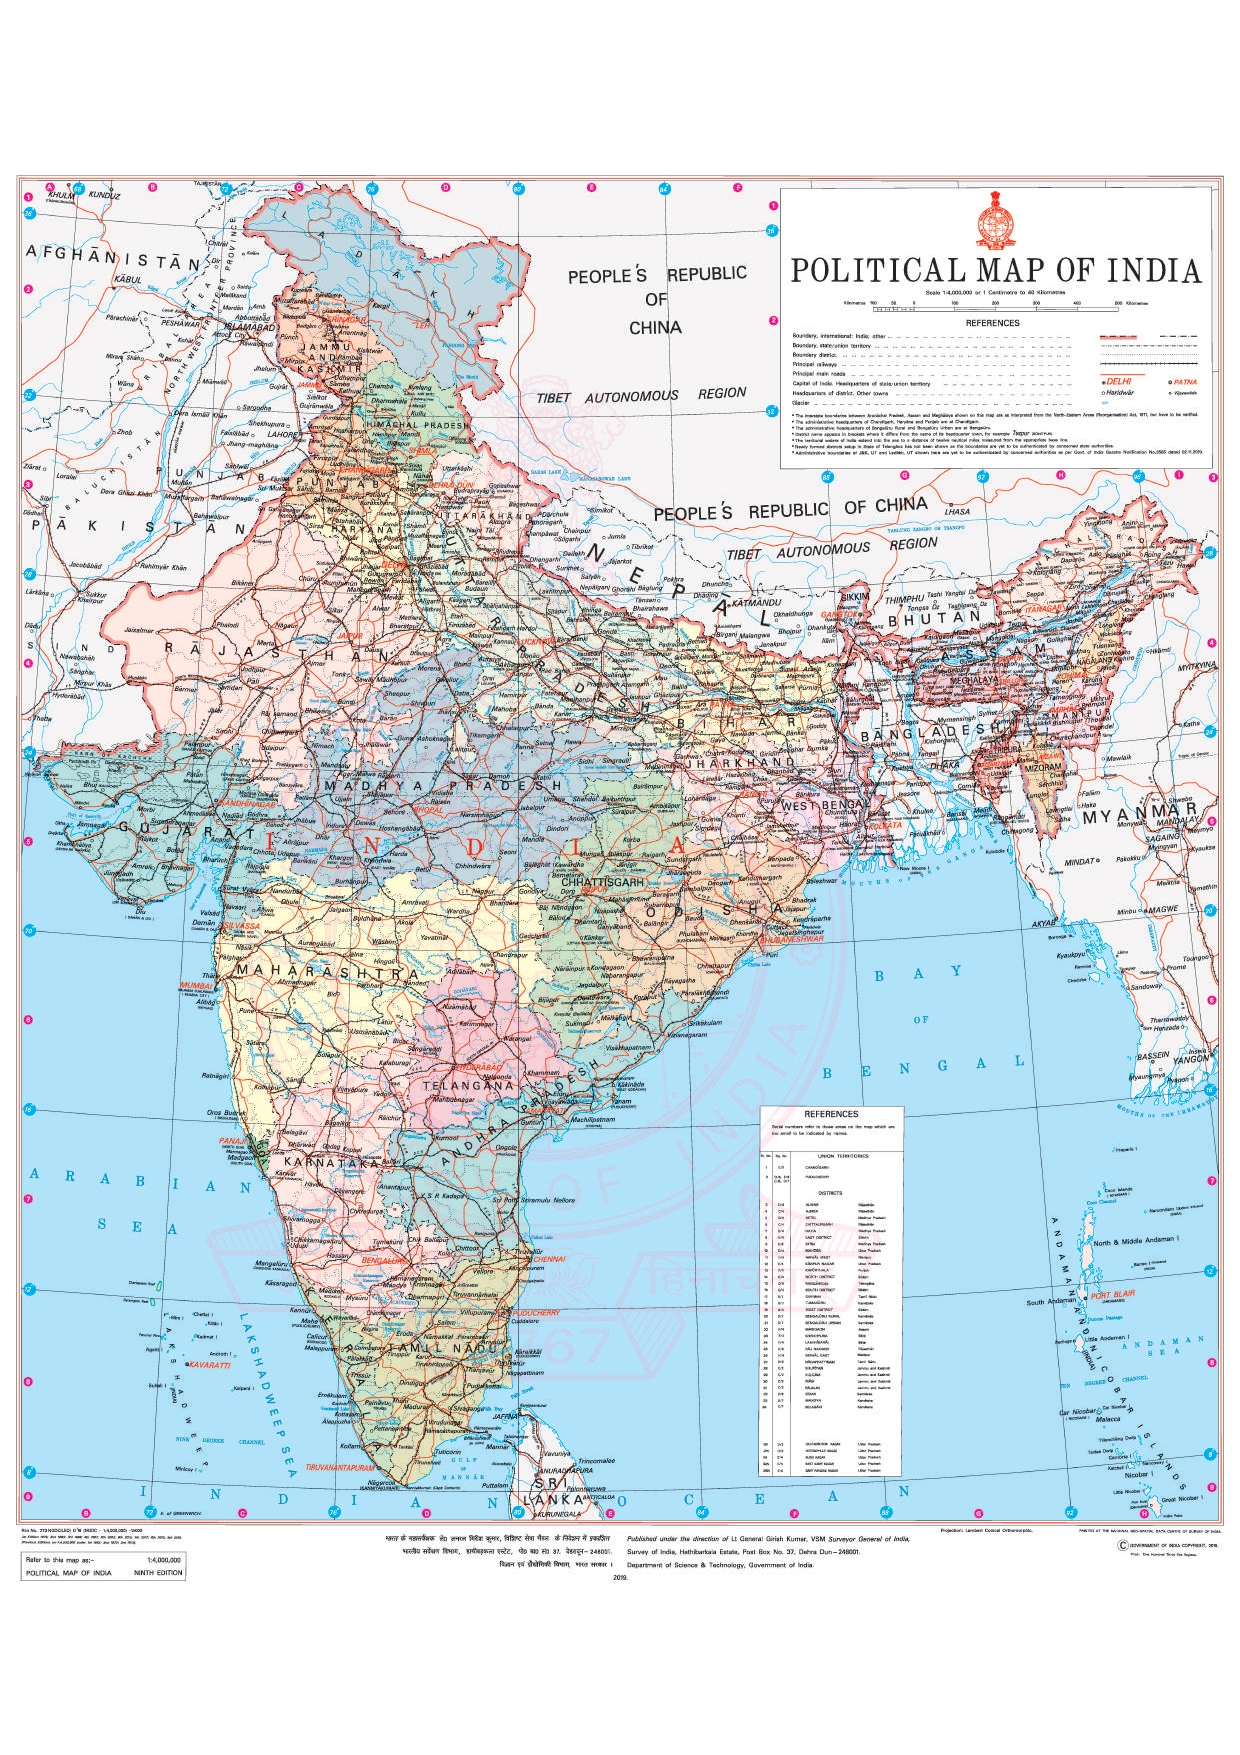 POLITICAL MAP OF INDIA